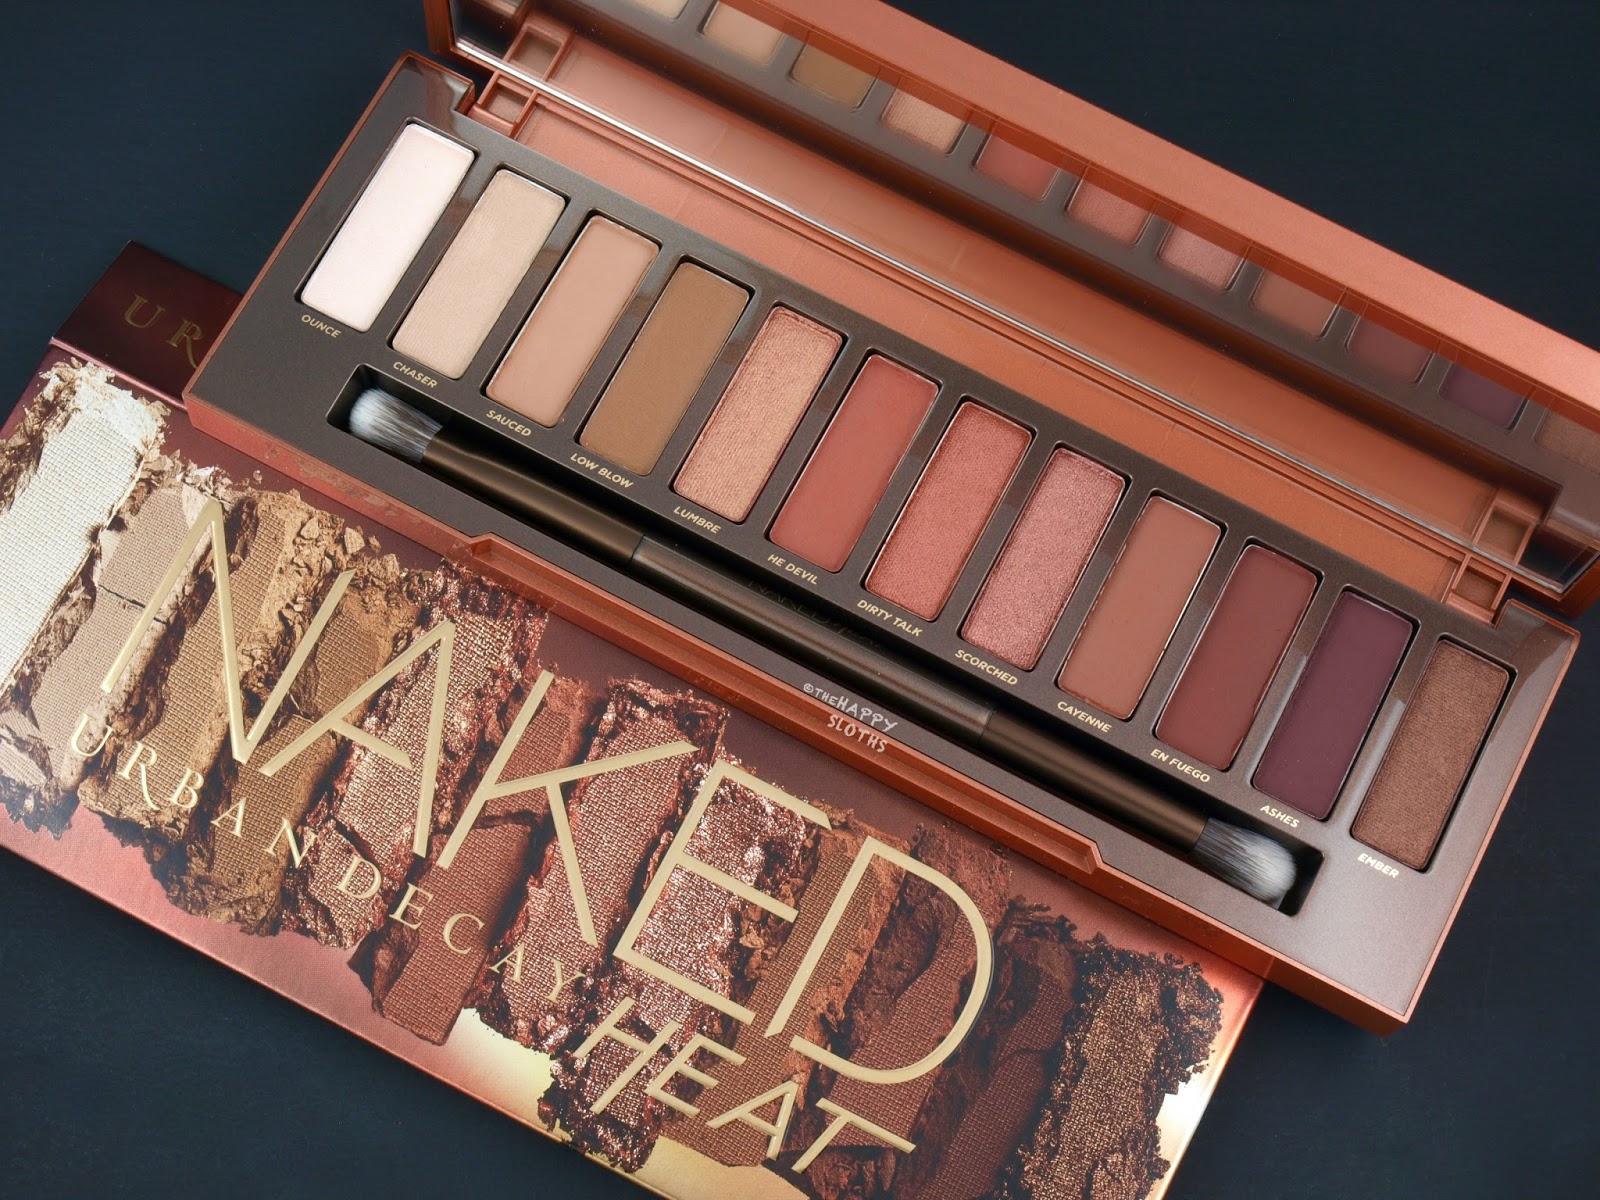 Urban Decay Naked Heat Palette Review And Swatches - When 